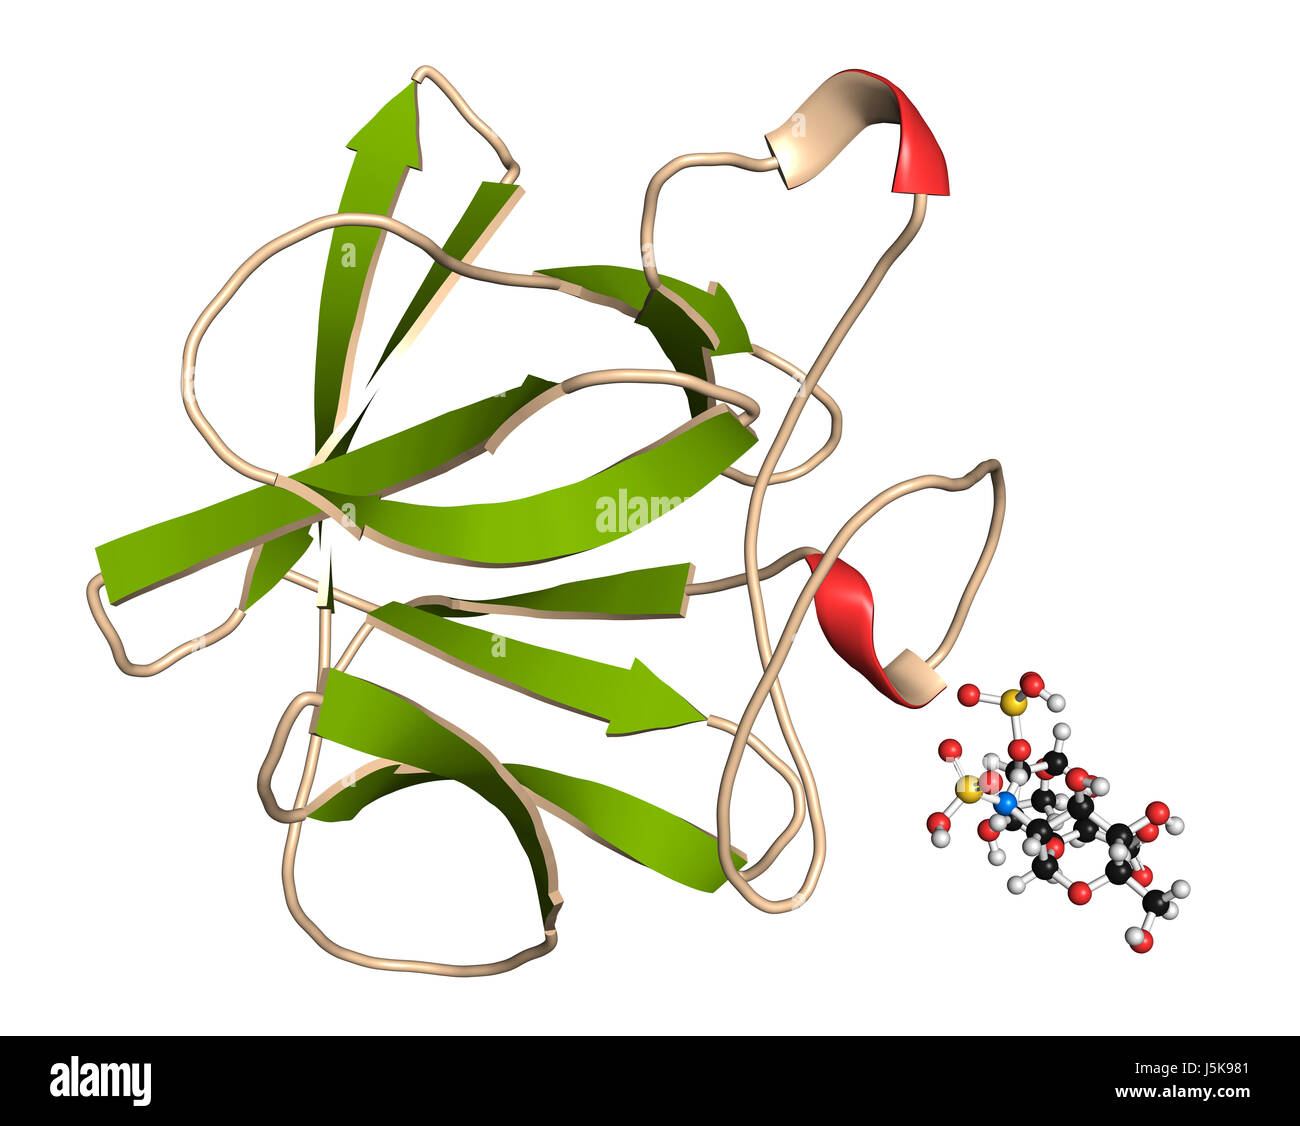 Fibroblast growth factor 1 (FGF1, heparin-binding growth factor 1) protein. FGF1 is being investigated for the treatment of diabetes. 3D rendering. Stock Photo